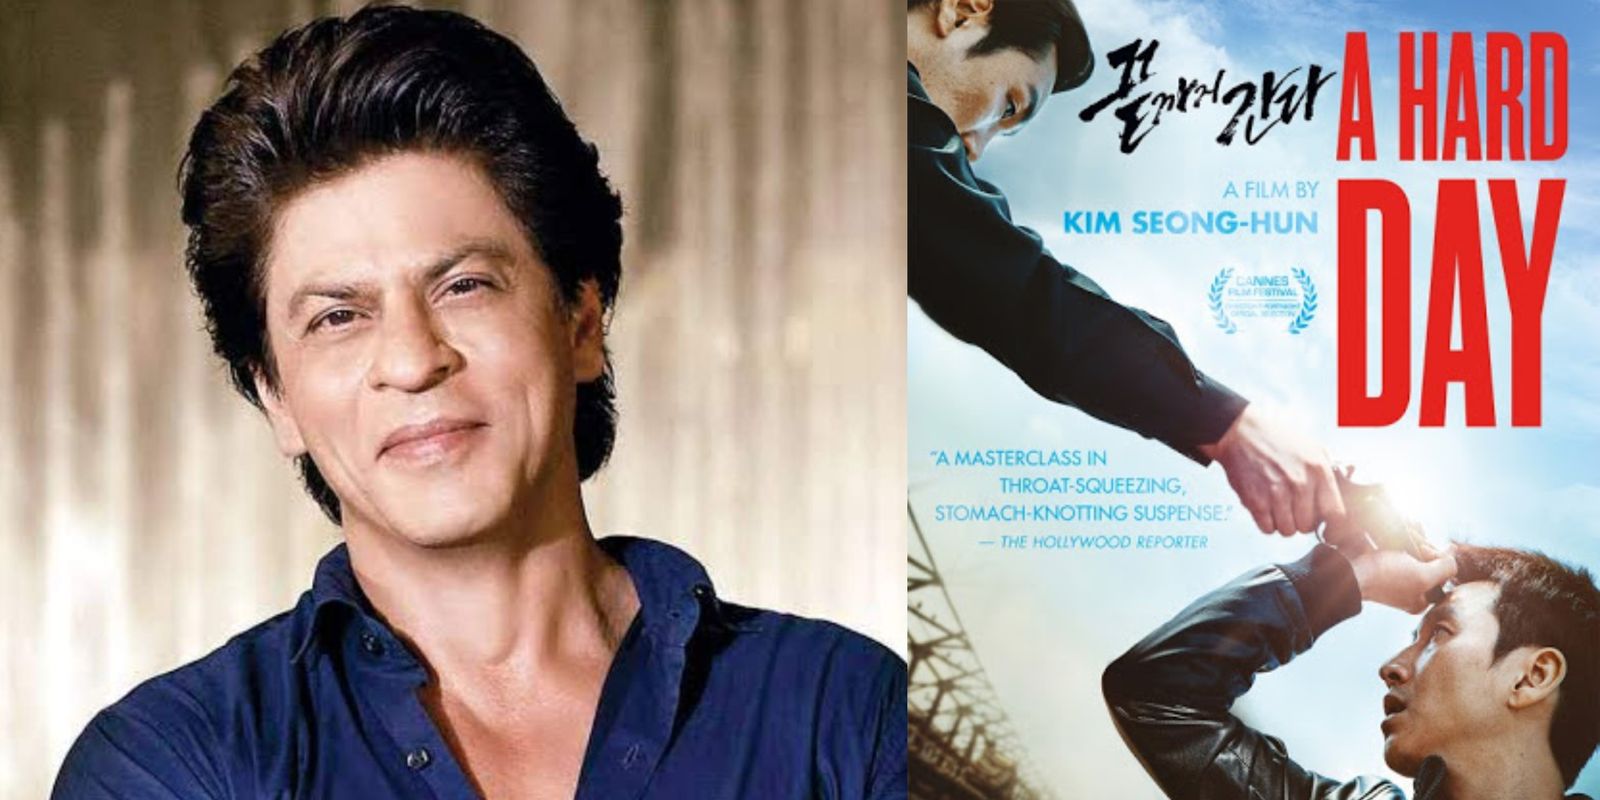 Shah Rukh Khan Buys Rights Of Korean Hit, A Hard Day; All Set To Produce The Remake